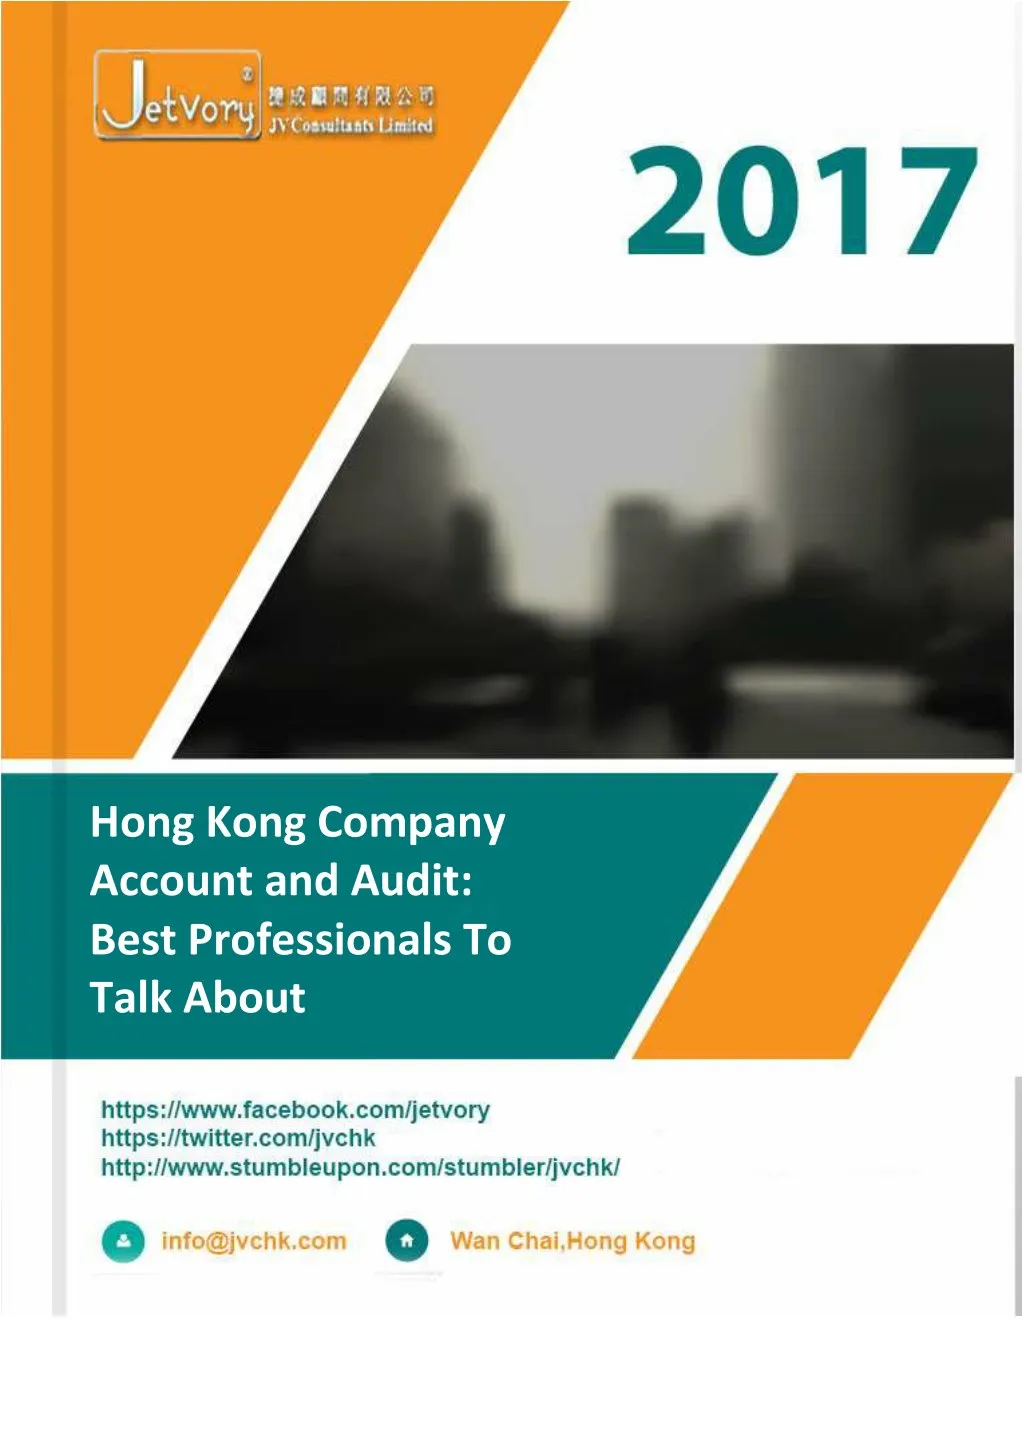 hong kong company account and audit best